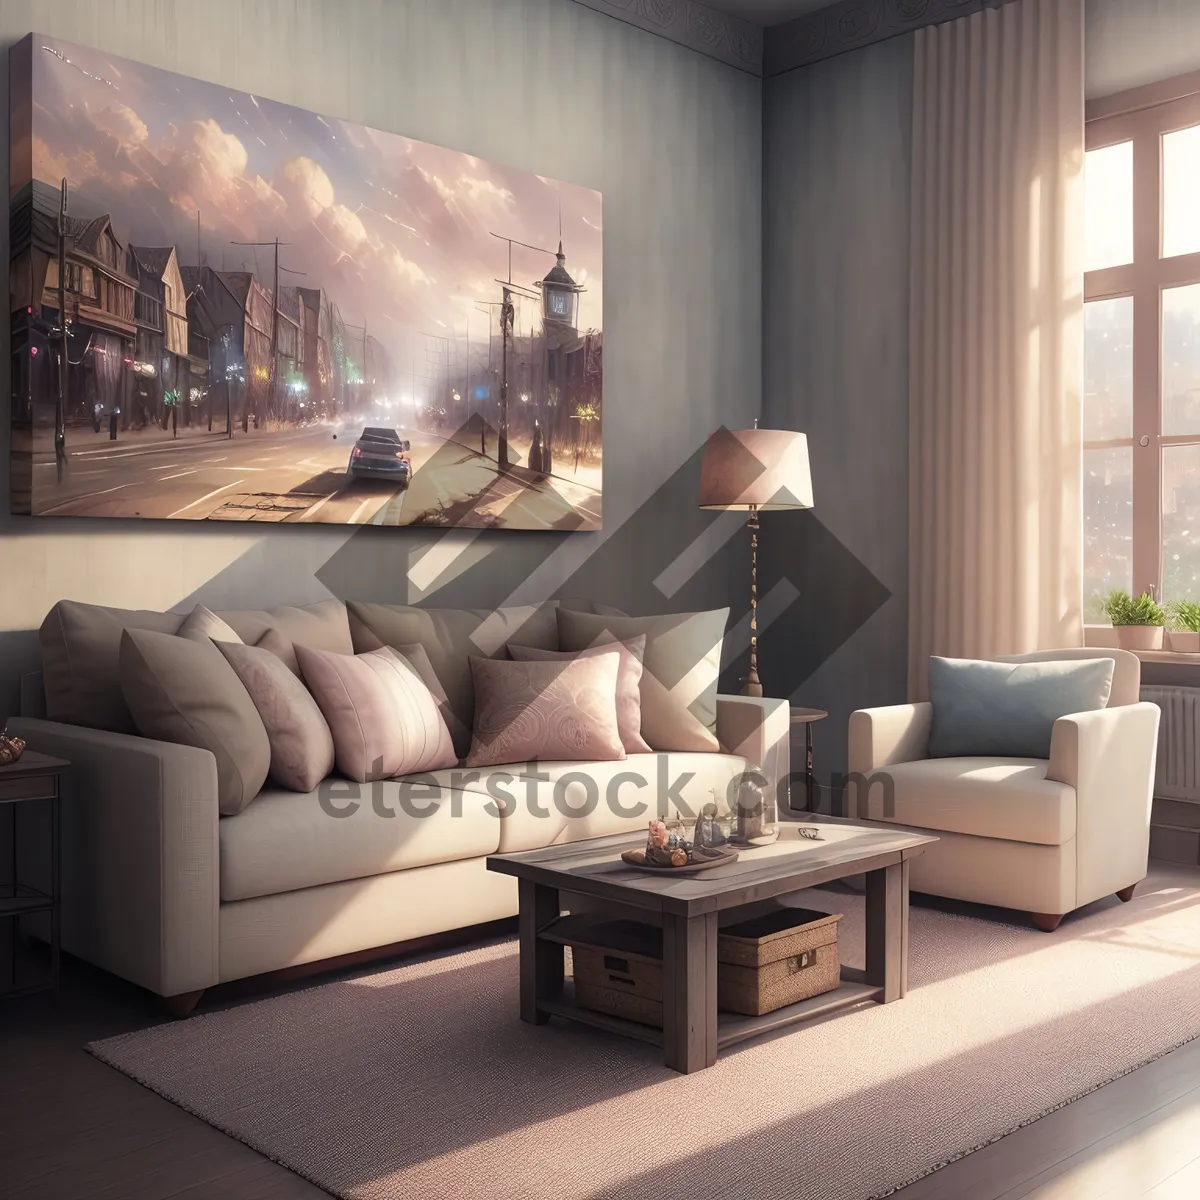 Picture of Modern Luxury Living Room with Stylish Sofa and Decor